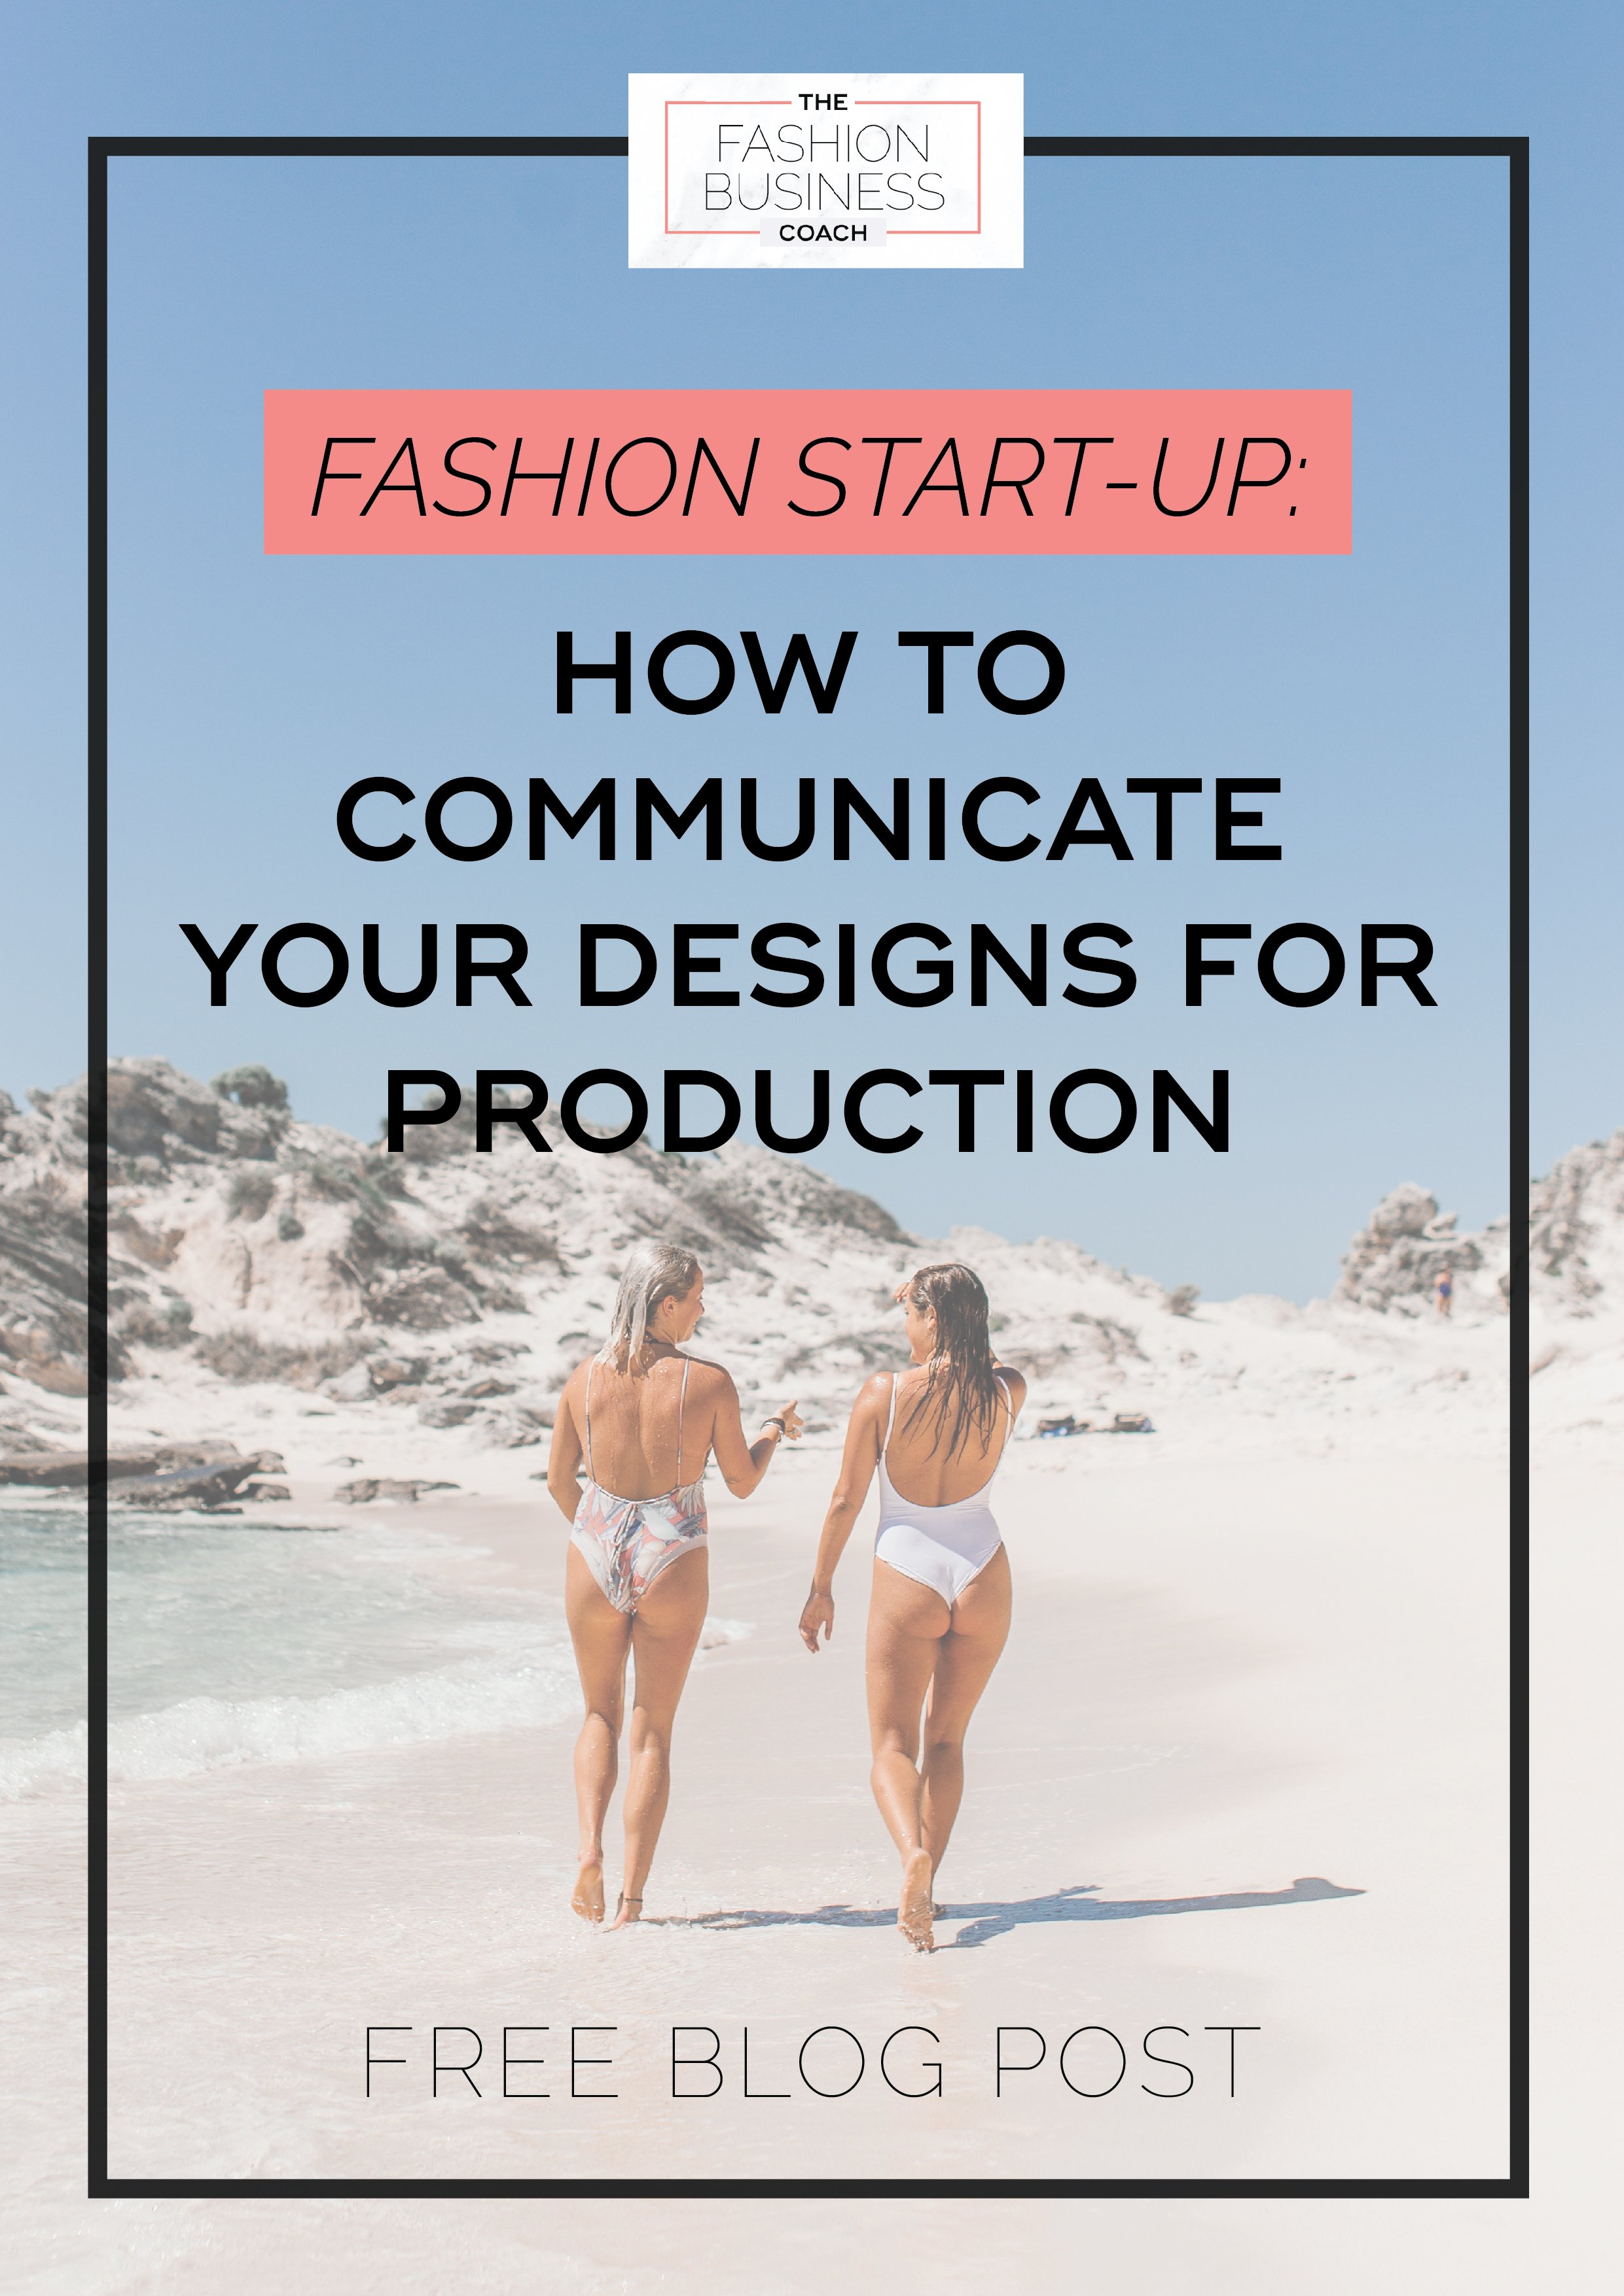 Fashion Start-up How to Communicate Your Designs for Production.jpg